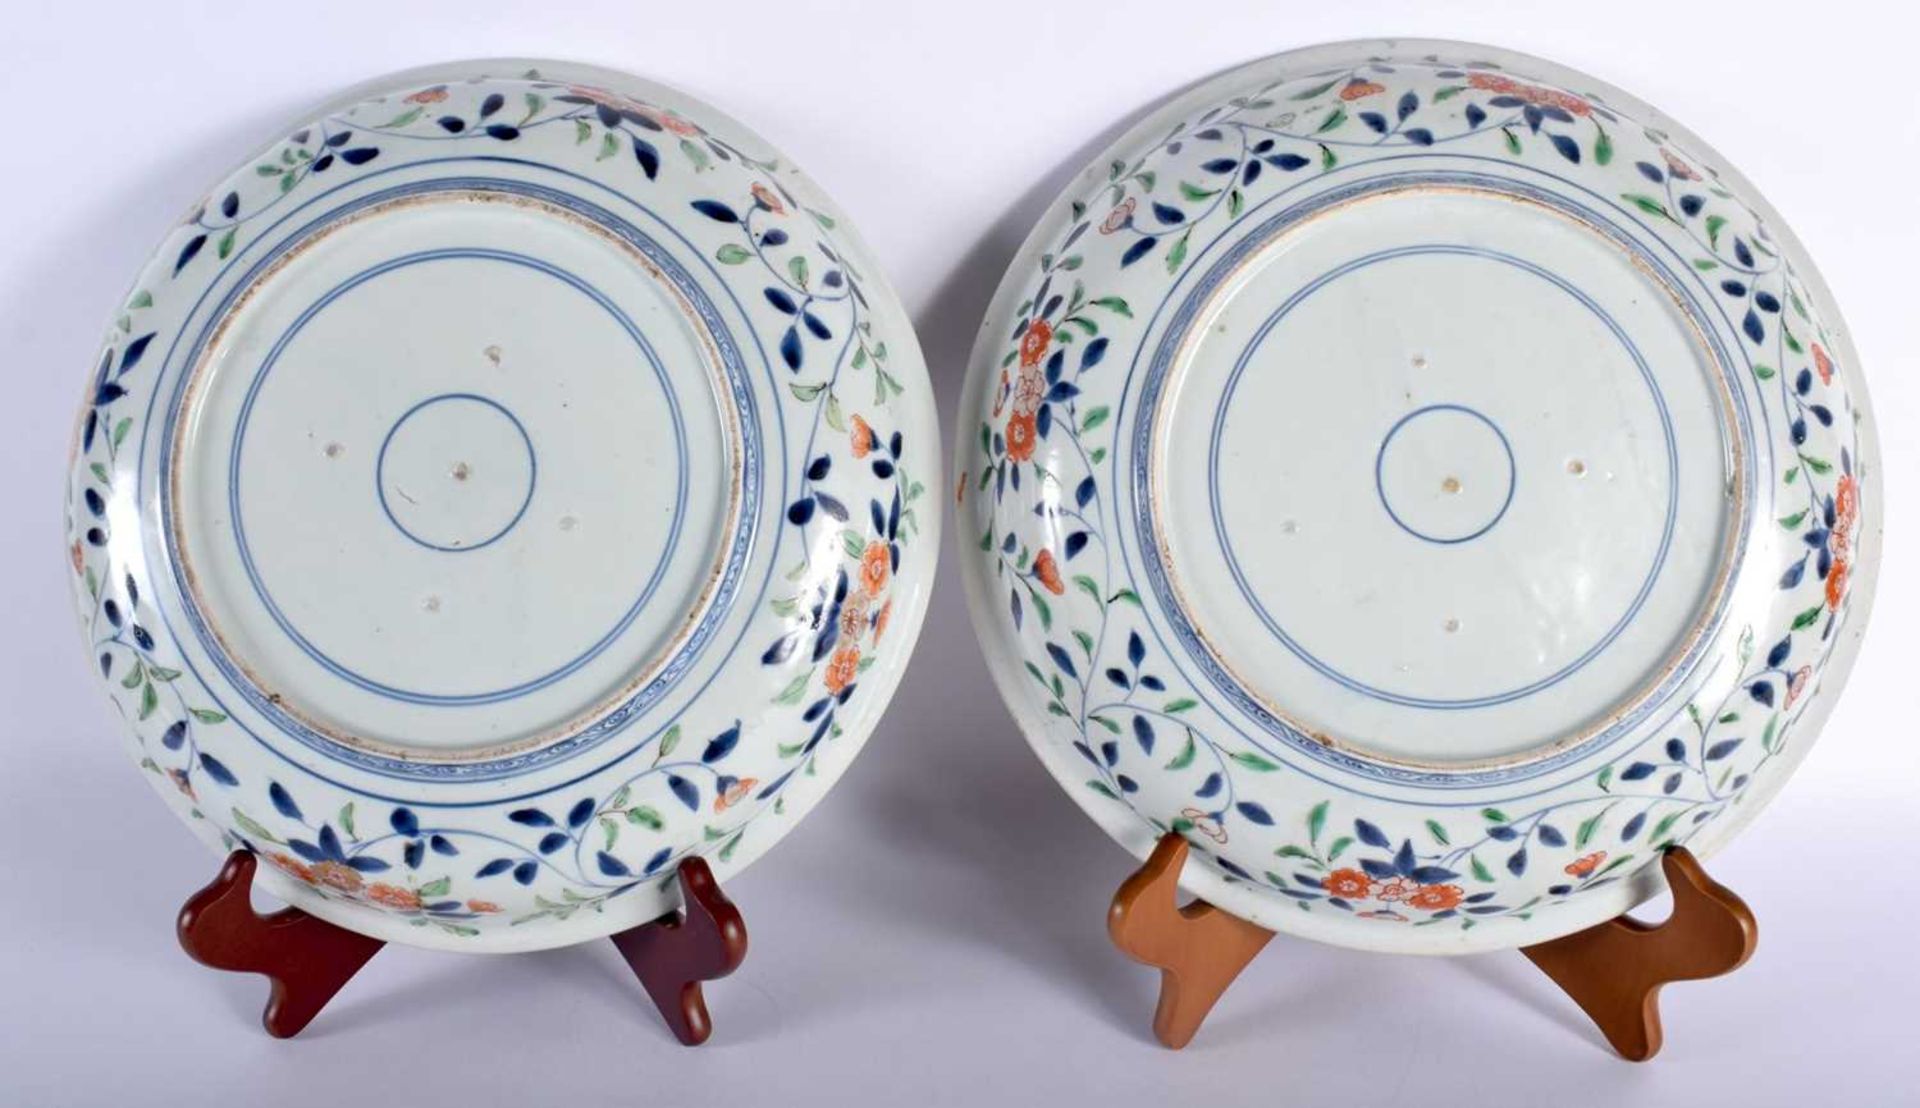 A LARGE PAIR OF 17TH CENTURY JAPANESE GENROKU PERIOD IMARI BOWLS C1688-1703 decorated in vibrant - Image 10 of 10